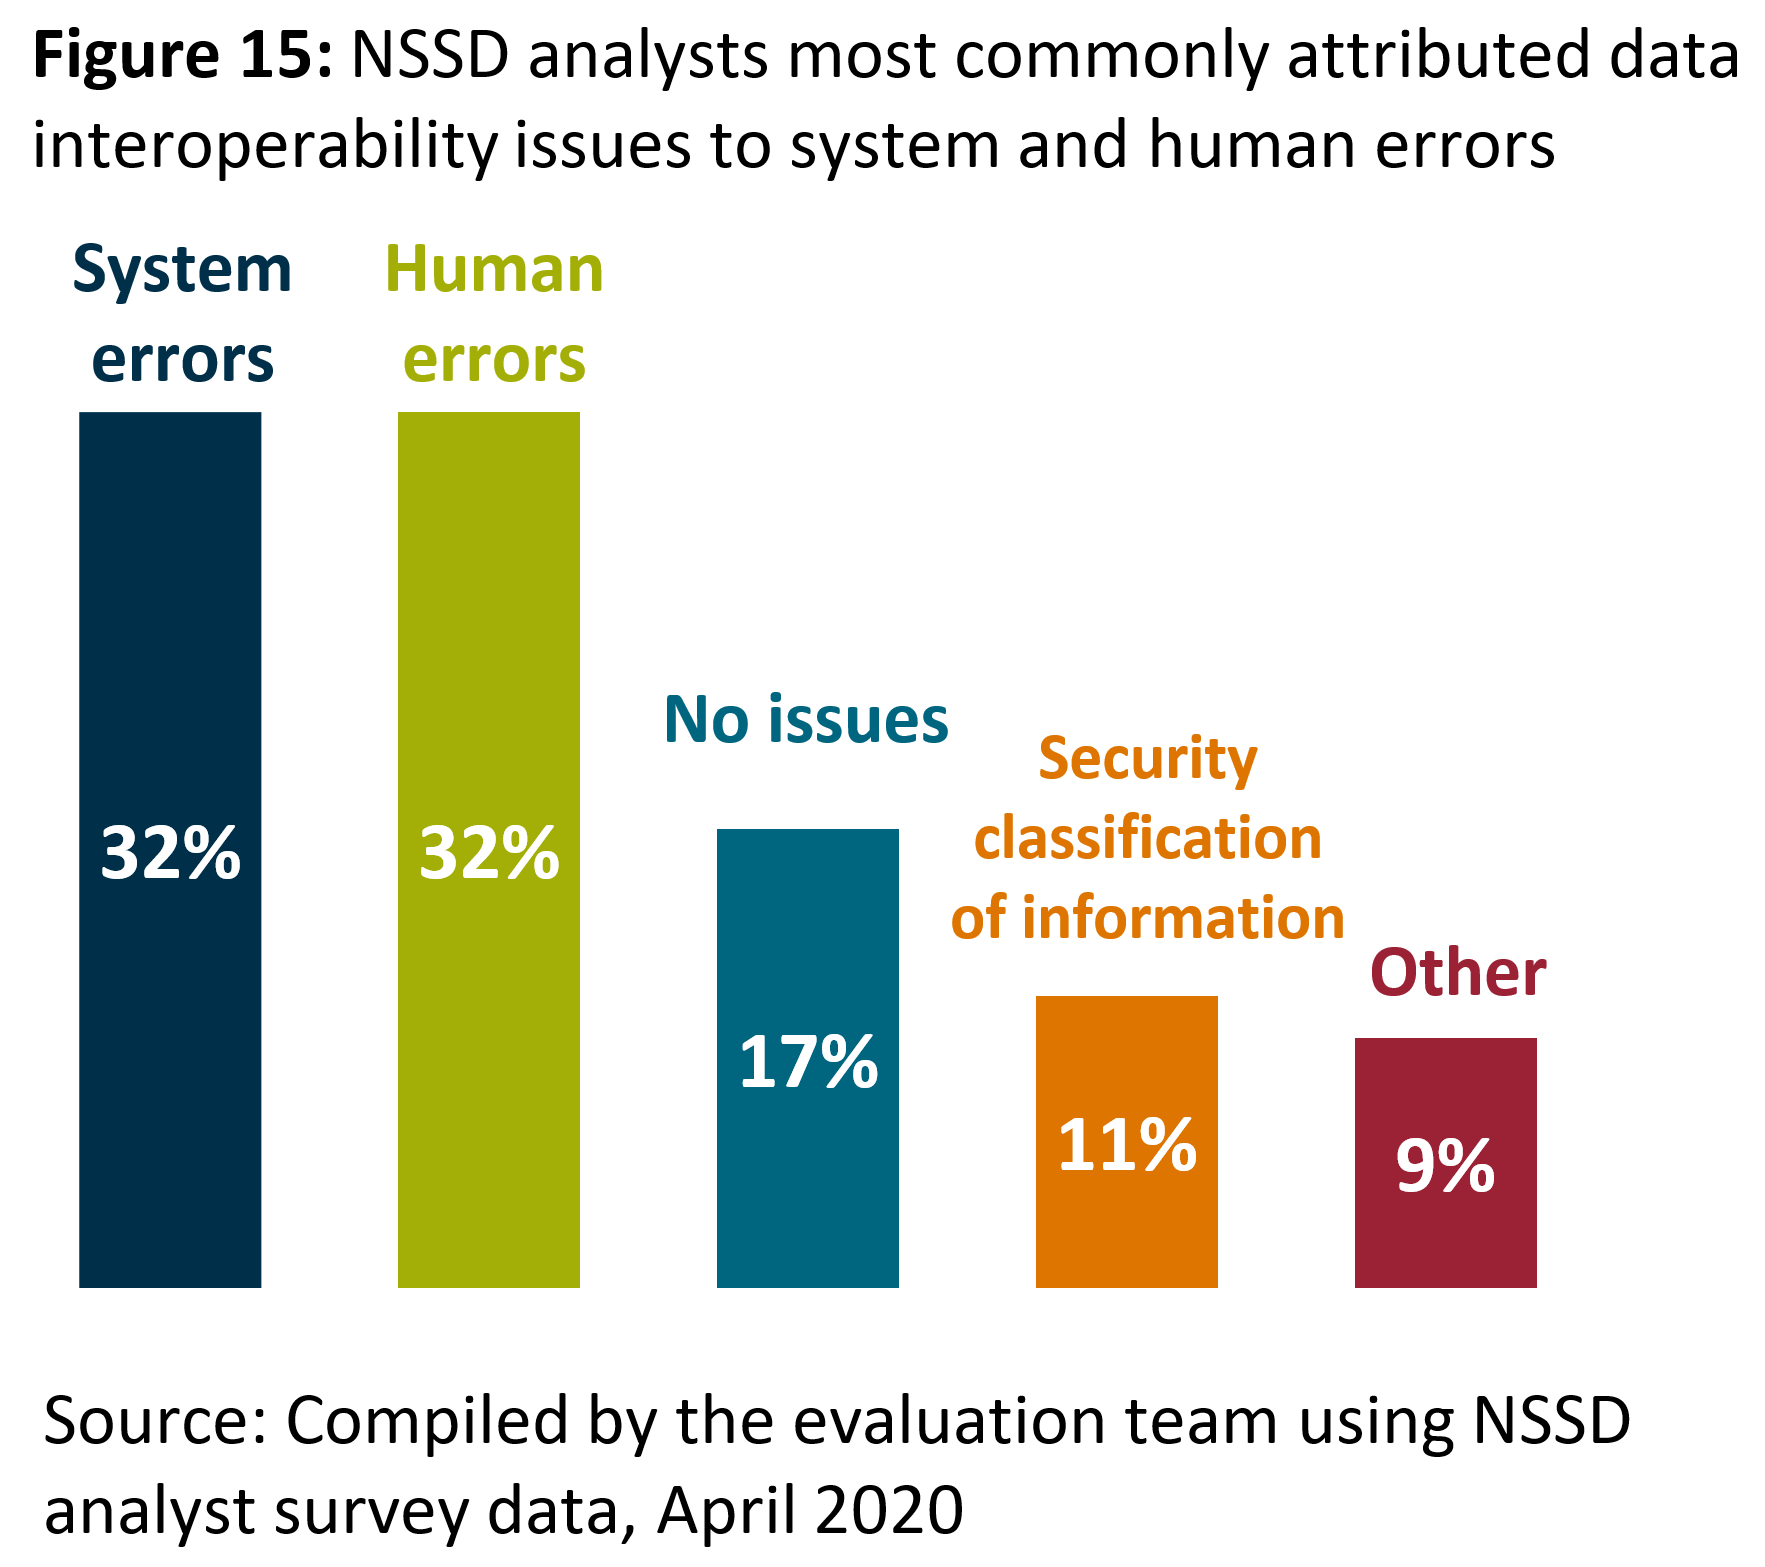 Figure 15 shows that <abbr>NSSD</abbr> analysts most commonly attributed data interoperability issues to system and human errors